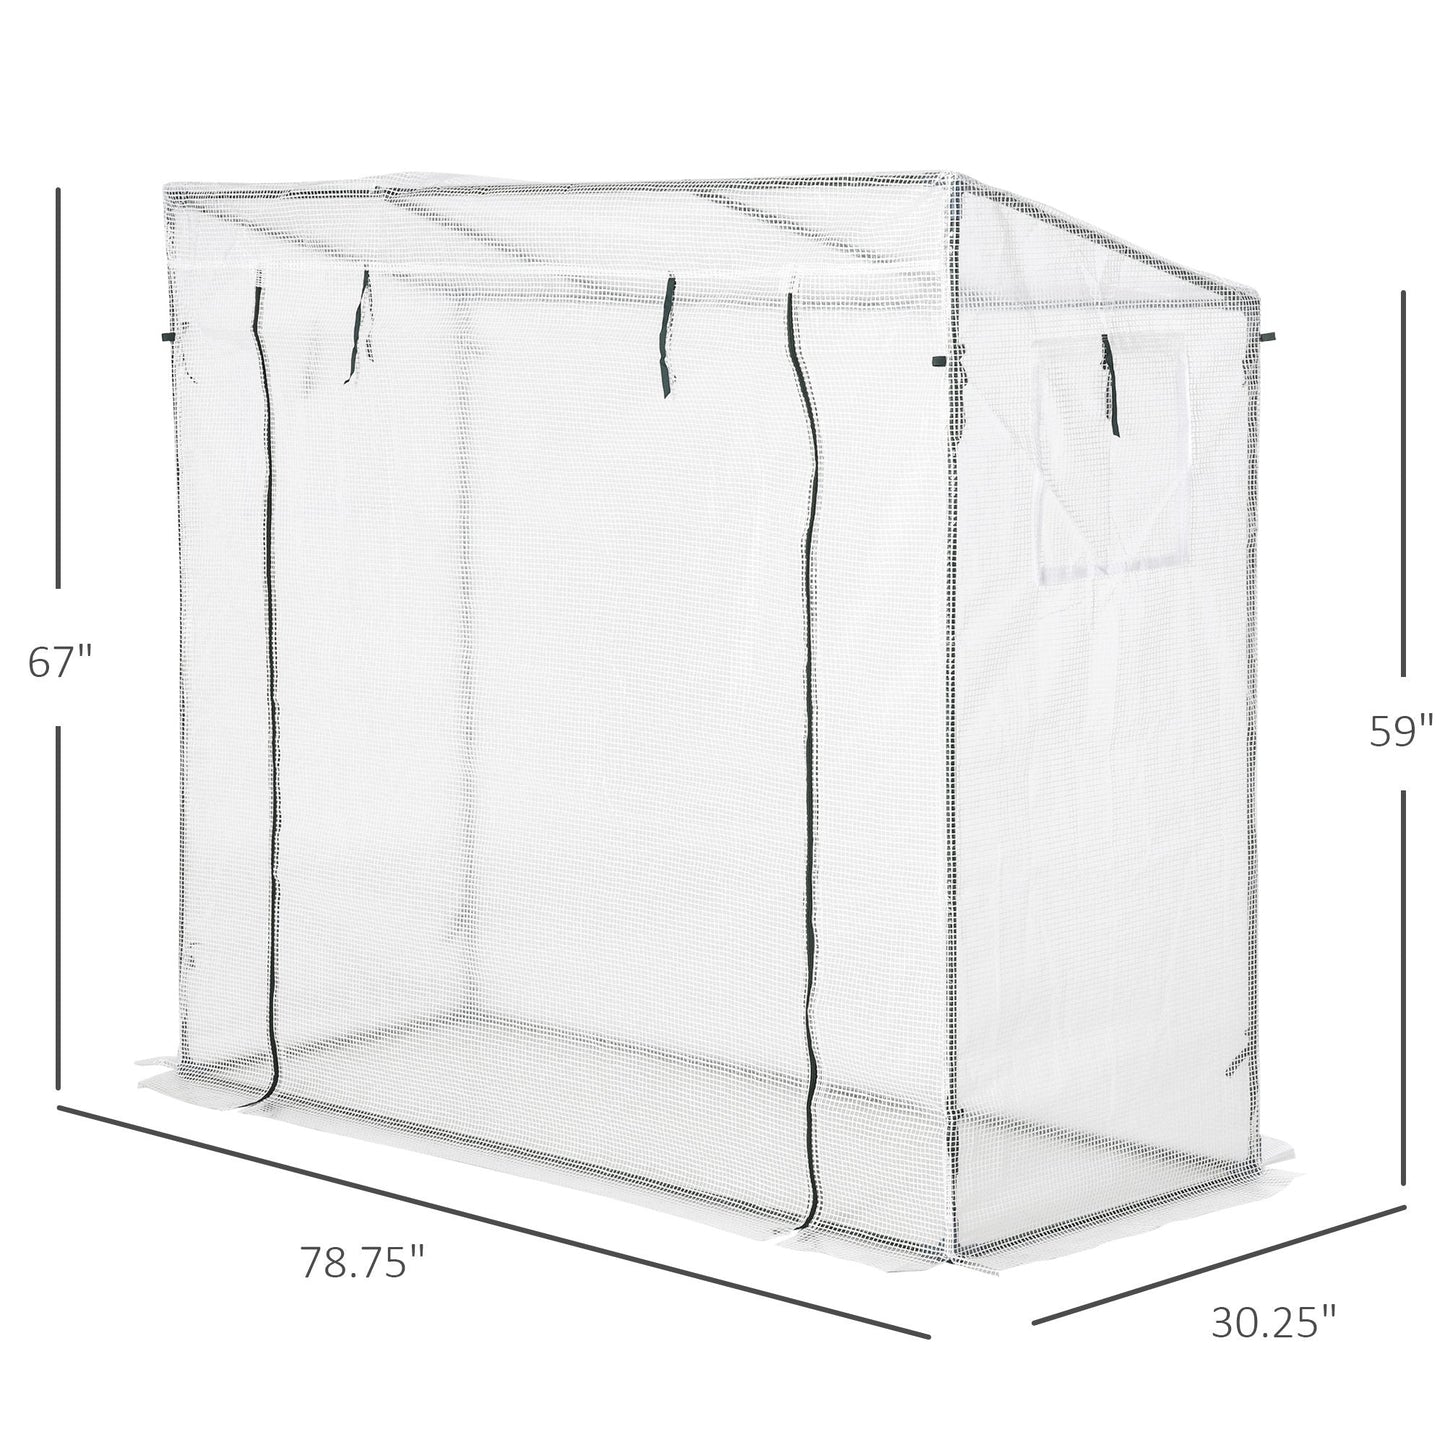 79" x 29" x 66" Walk-in Garden Greenhouse Patio Hot House with Durable Steel Frame Outdoor Tomato Plant House White at Gallery Canada